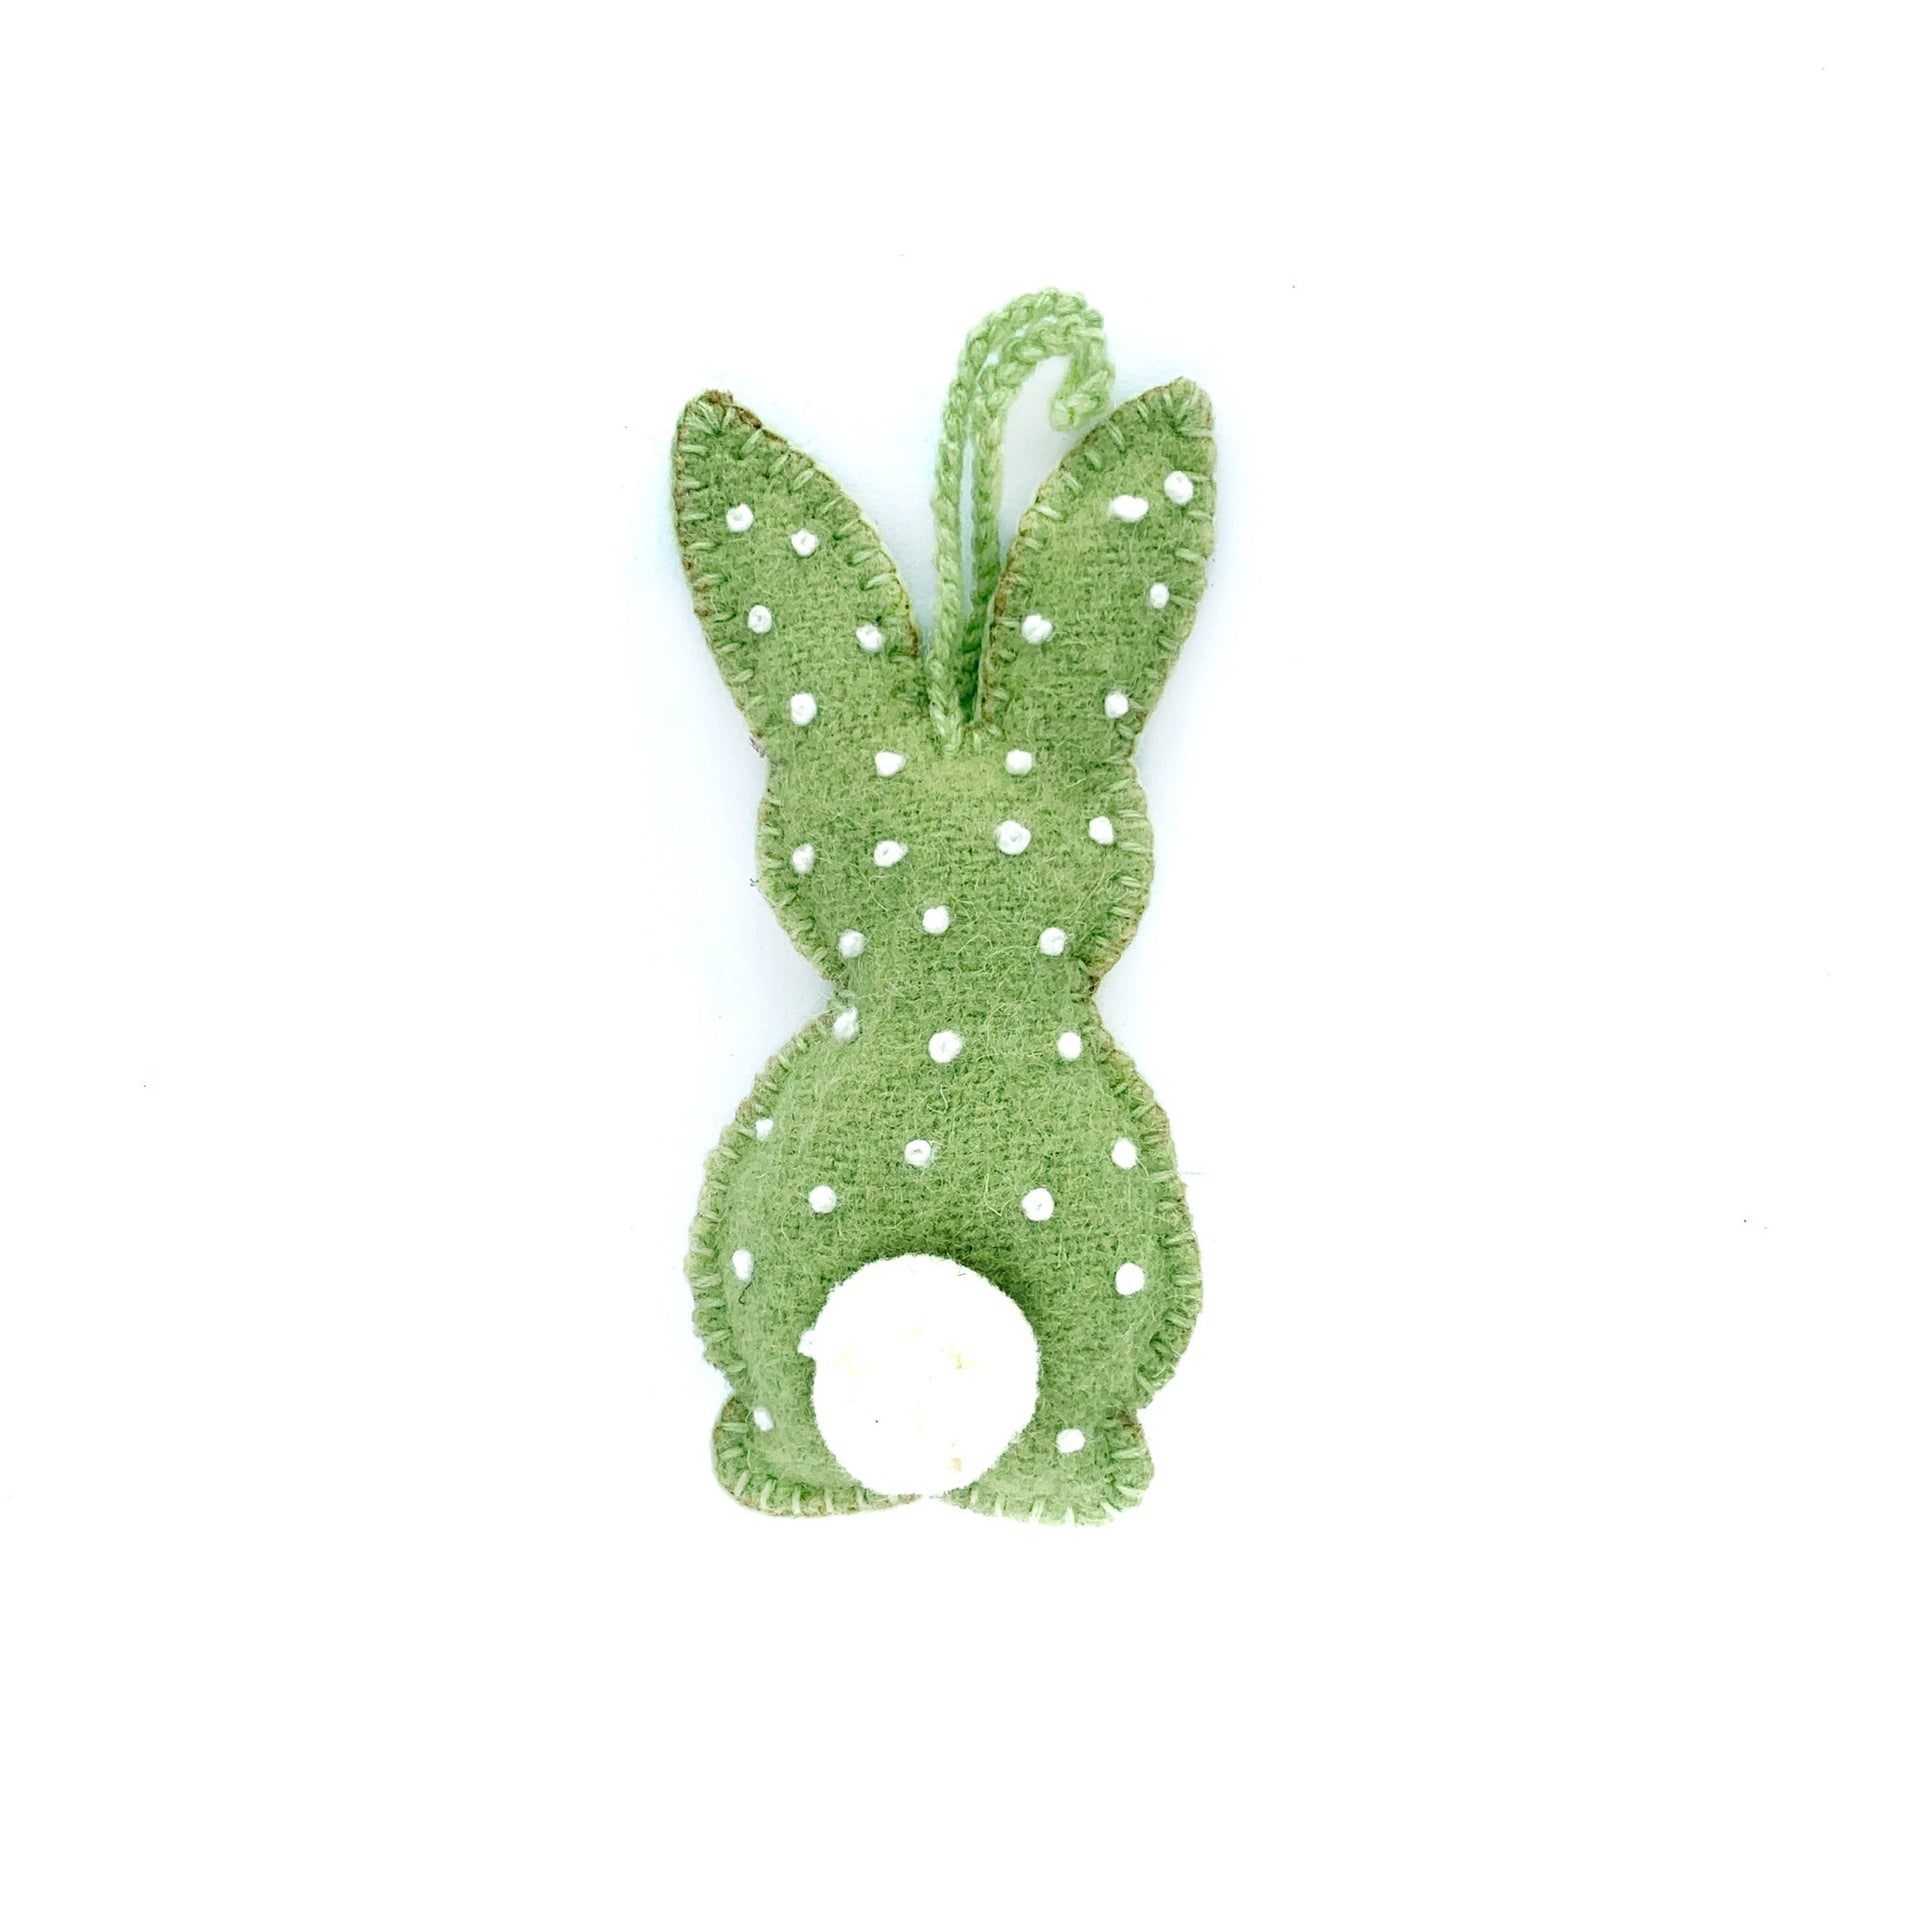 Pastel green handmade Easter bunny ornament with embroidered white dots and pom pom tail.